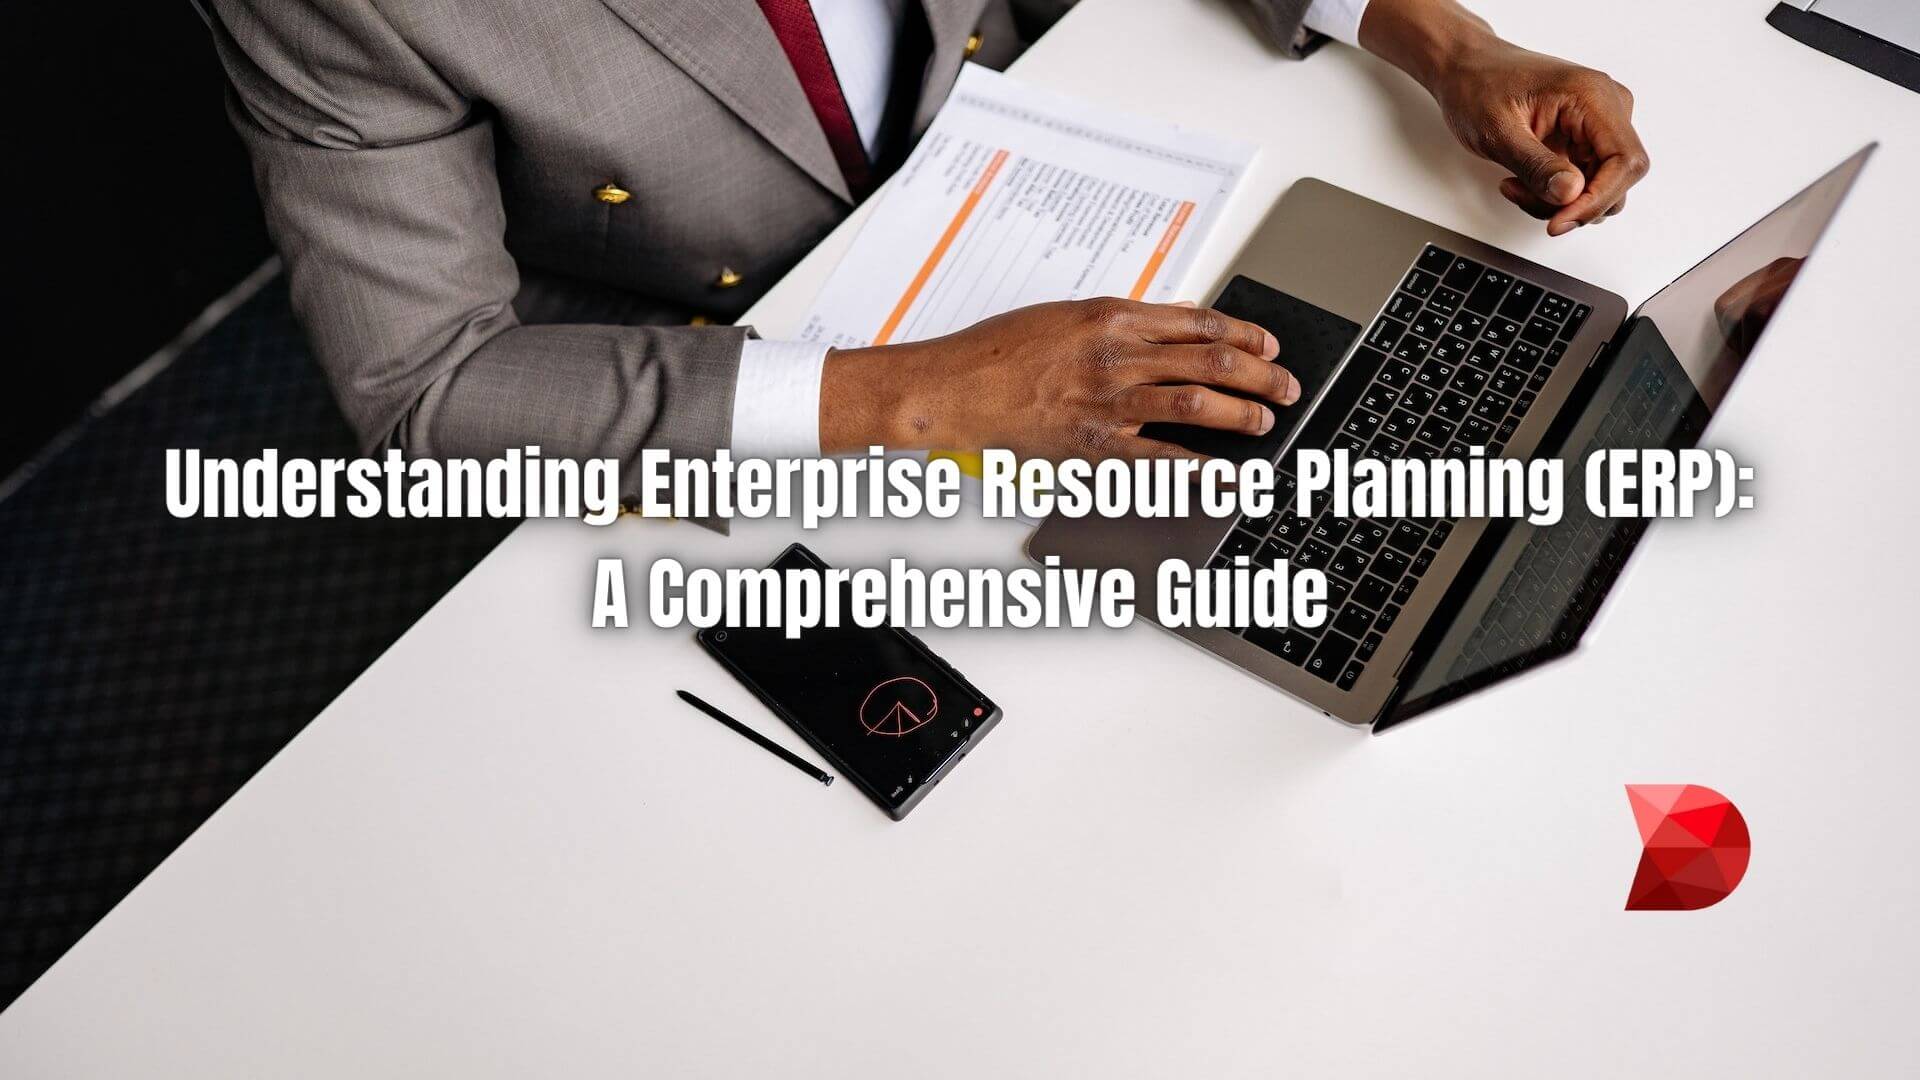 Enterprise Resource Planning (ERP) systems are tools that offer a solution that integrates and manages the parts of a business. Learn more!